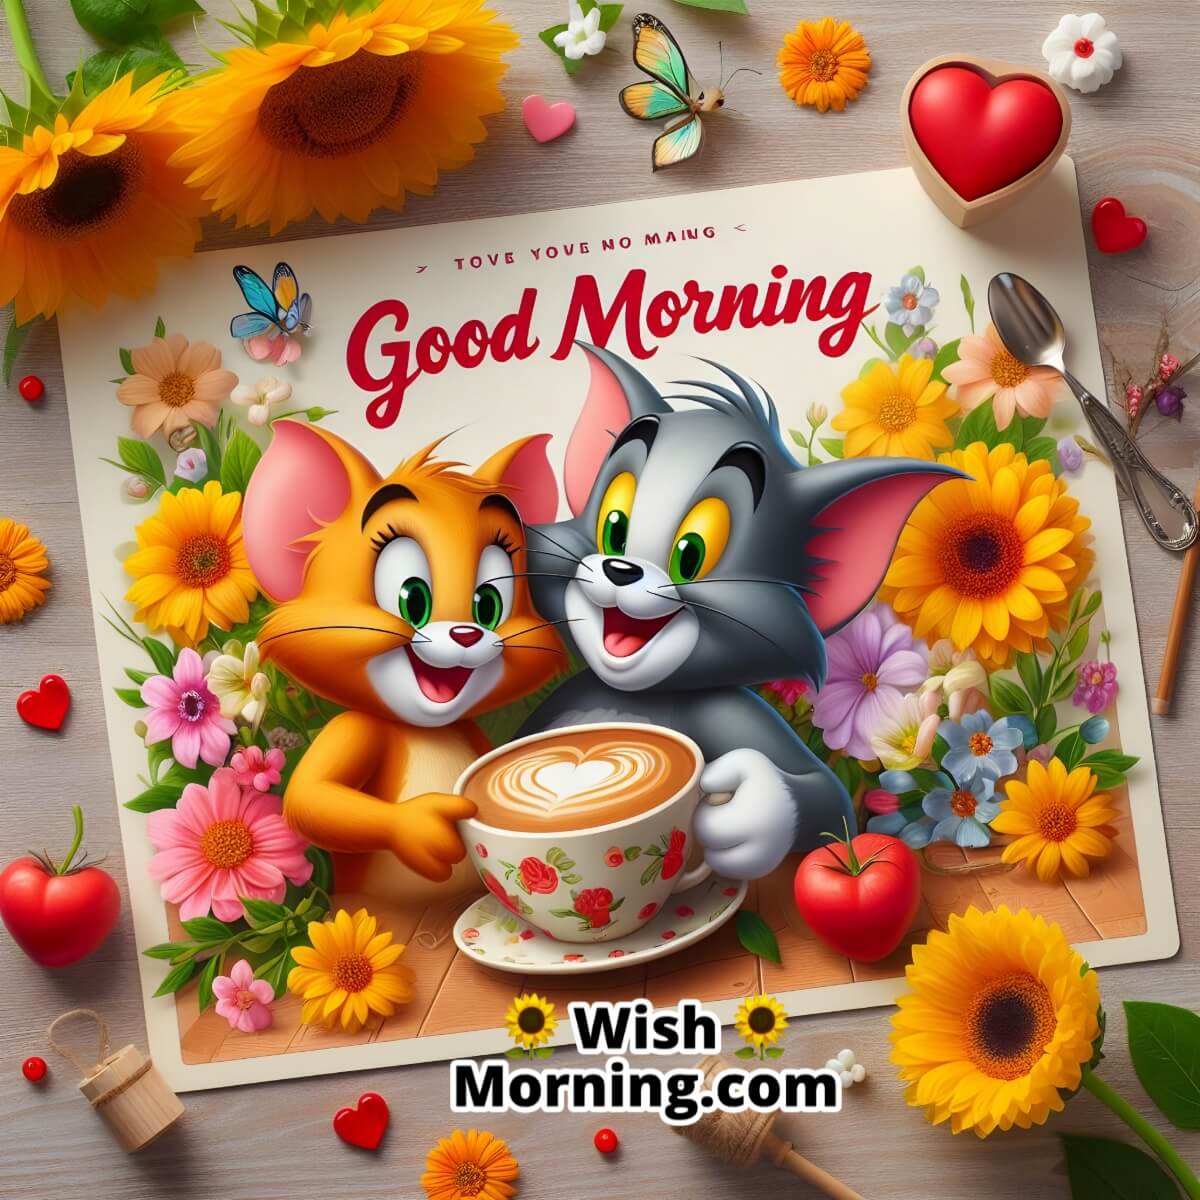 Good Morning Tom And Jerry Images